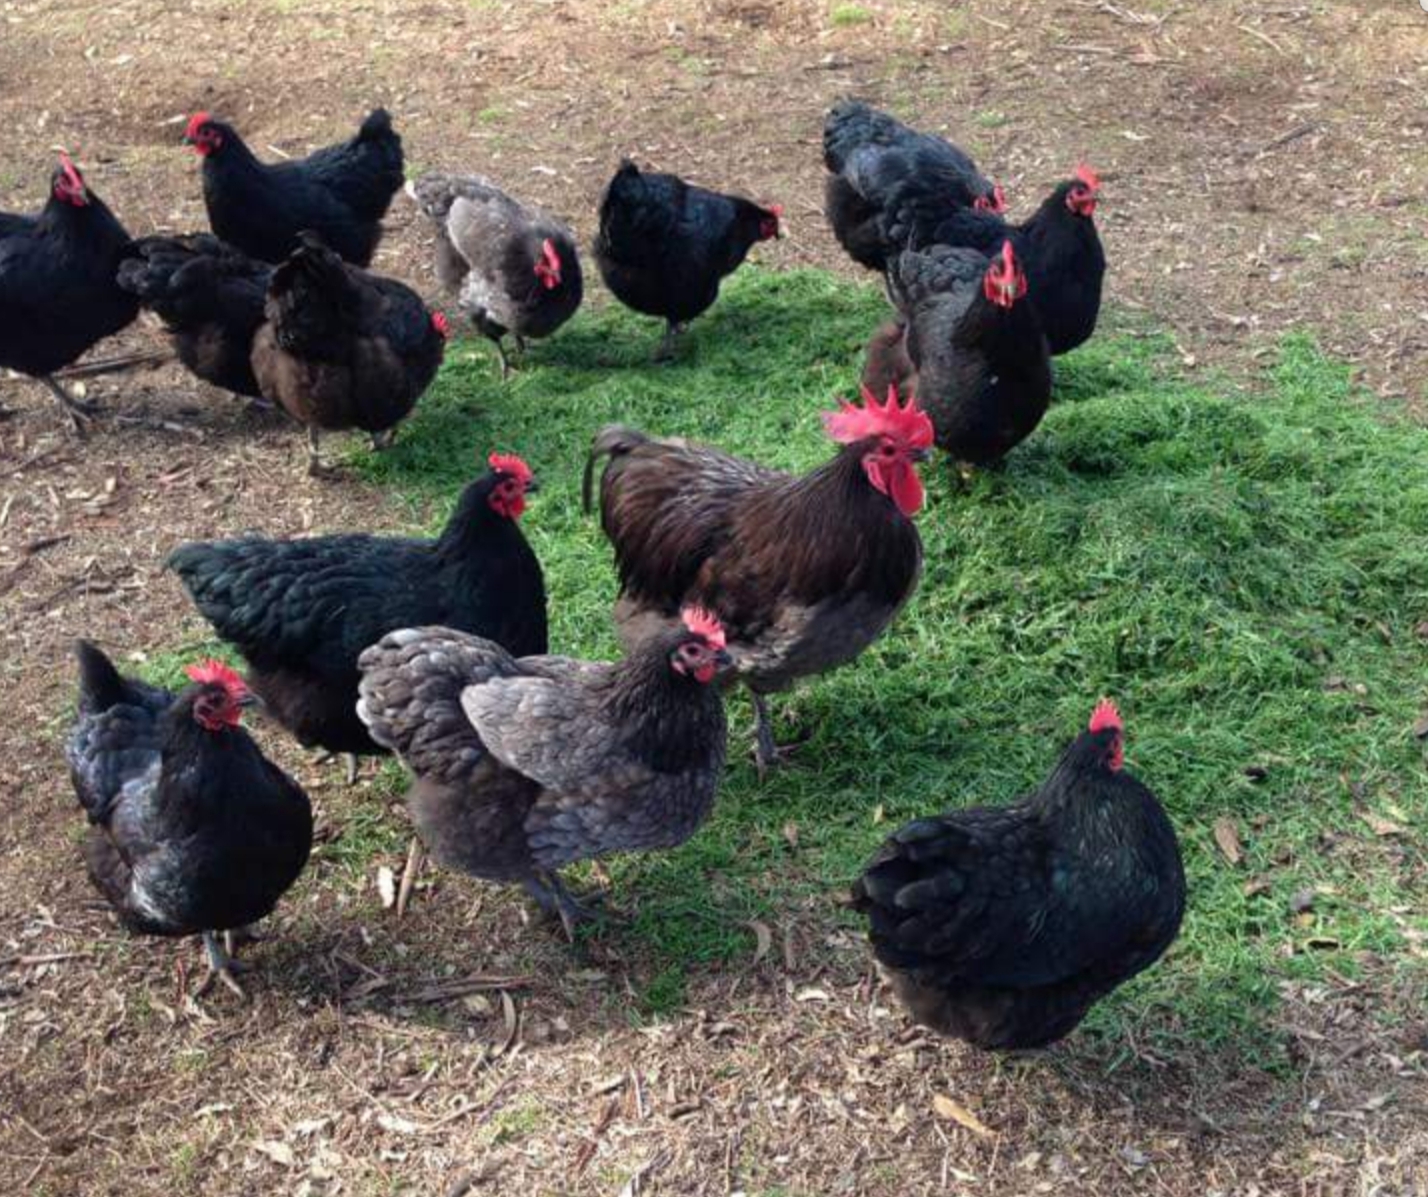 group of black chickens eating grass